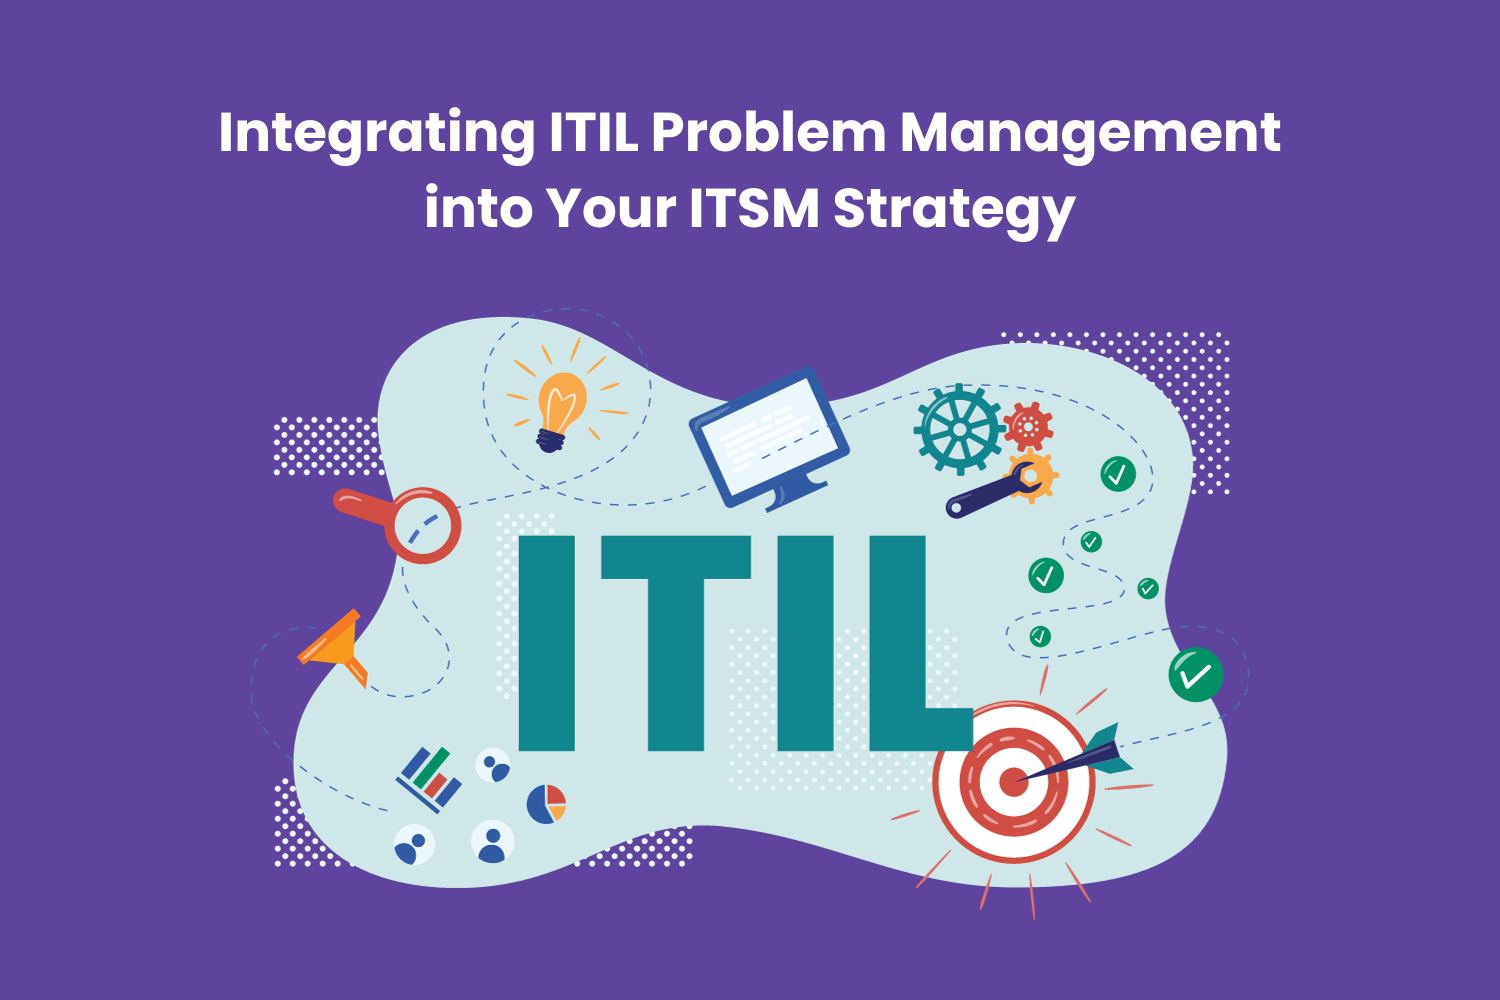 Integrating ITIL Problem Management into Your ITSM Strategy